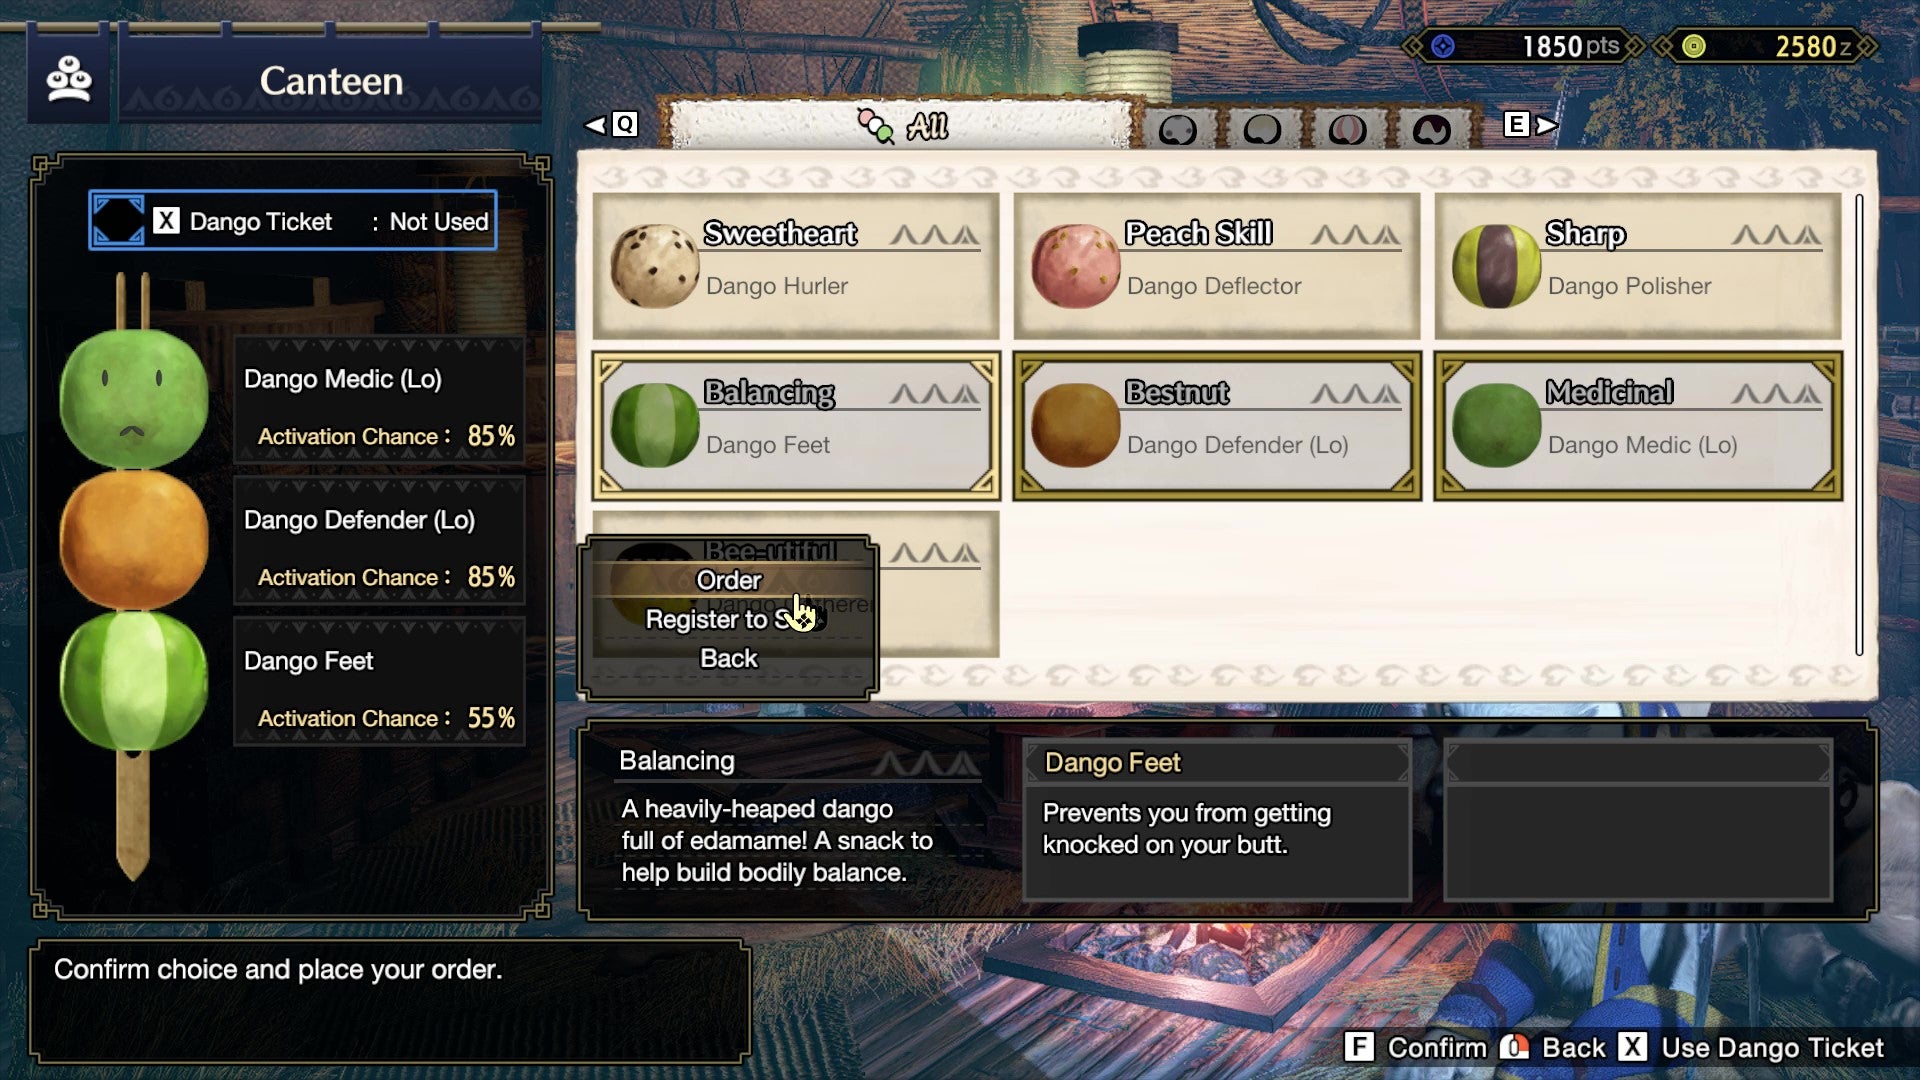 Ordering a trio of Bunny Dango from the canteen at the start of a Monster Hunter Rise quest.